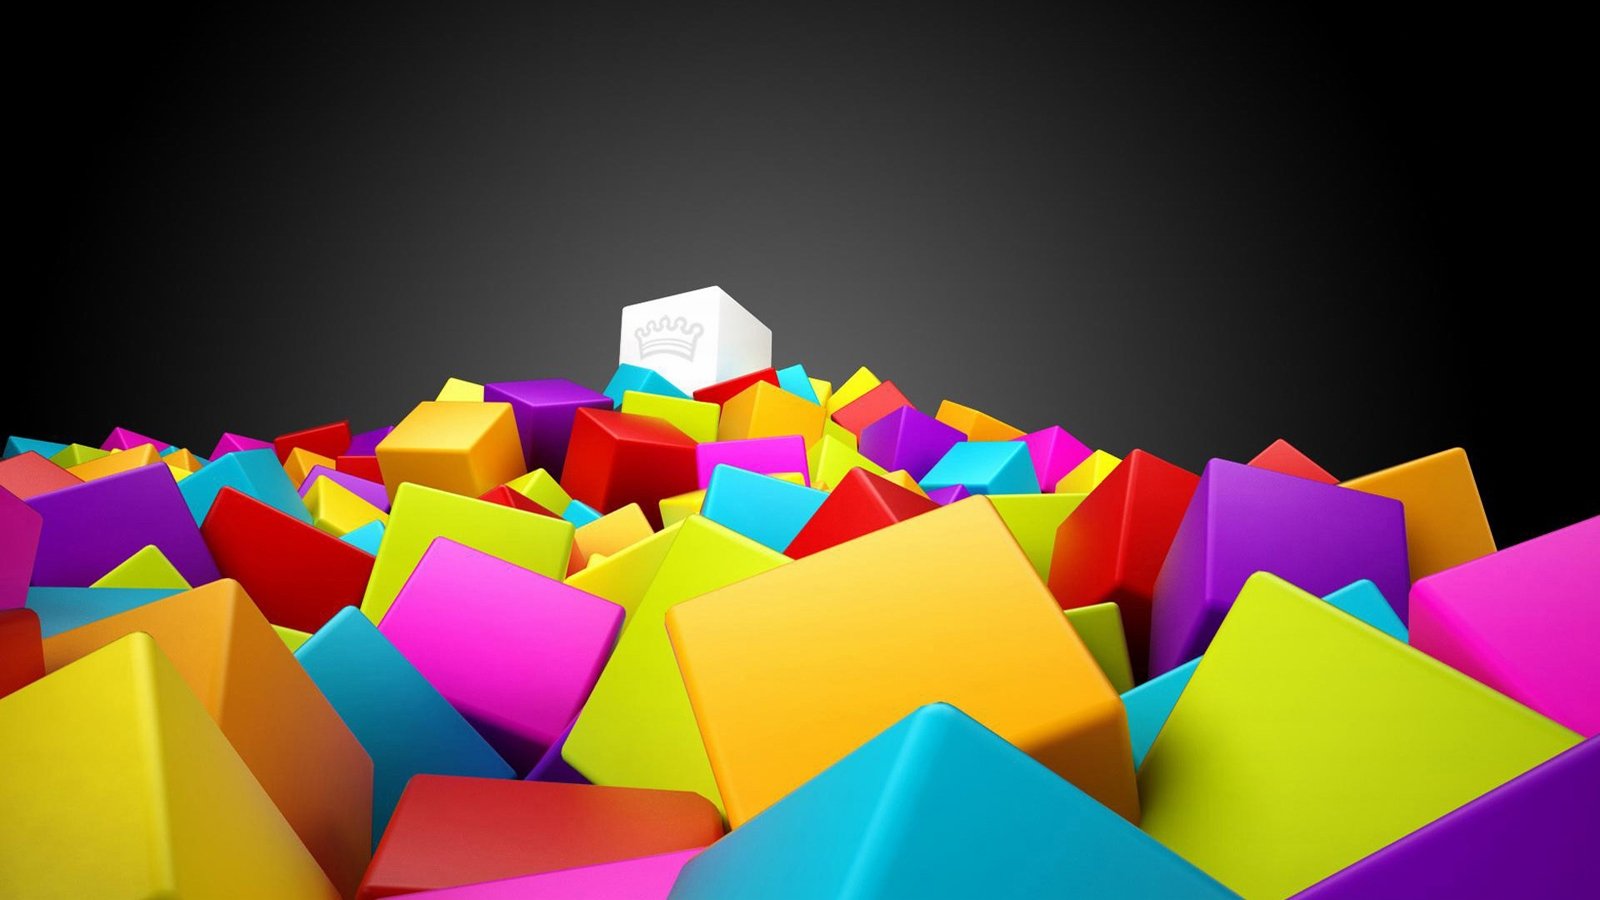 Awesome 3D Cubes and Cube King HD Wallpaper Hd Wallpaper 1600x900